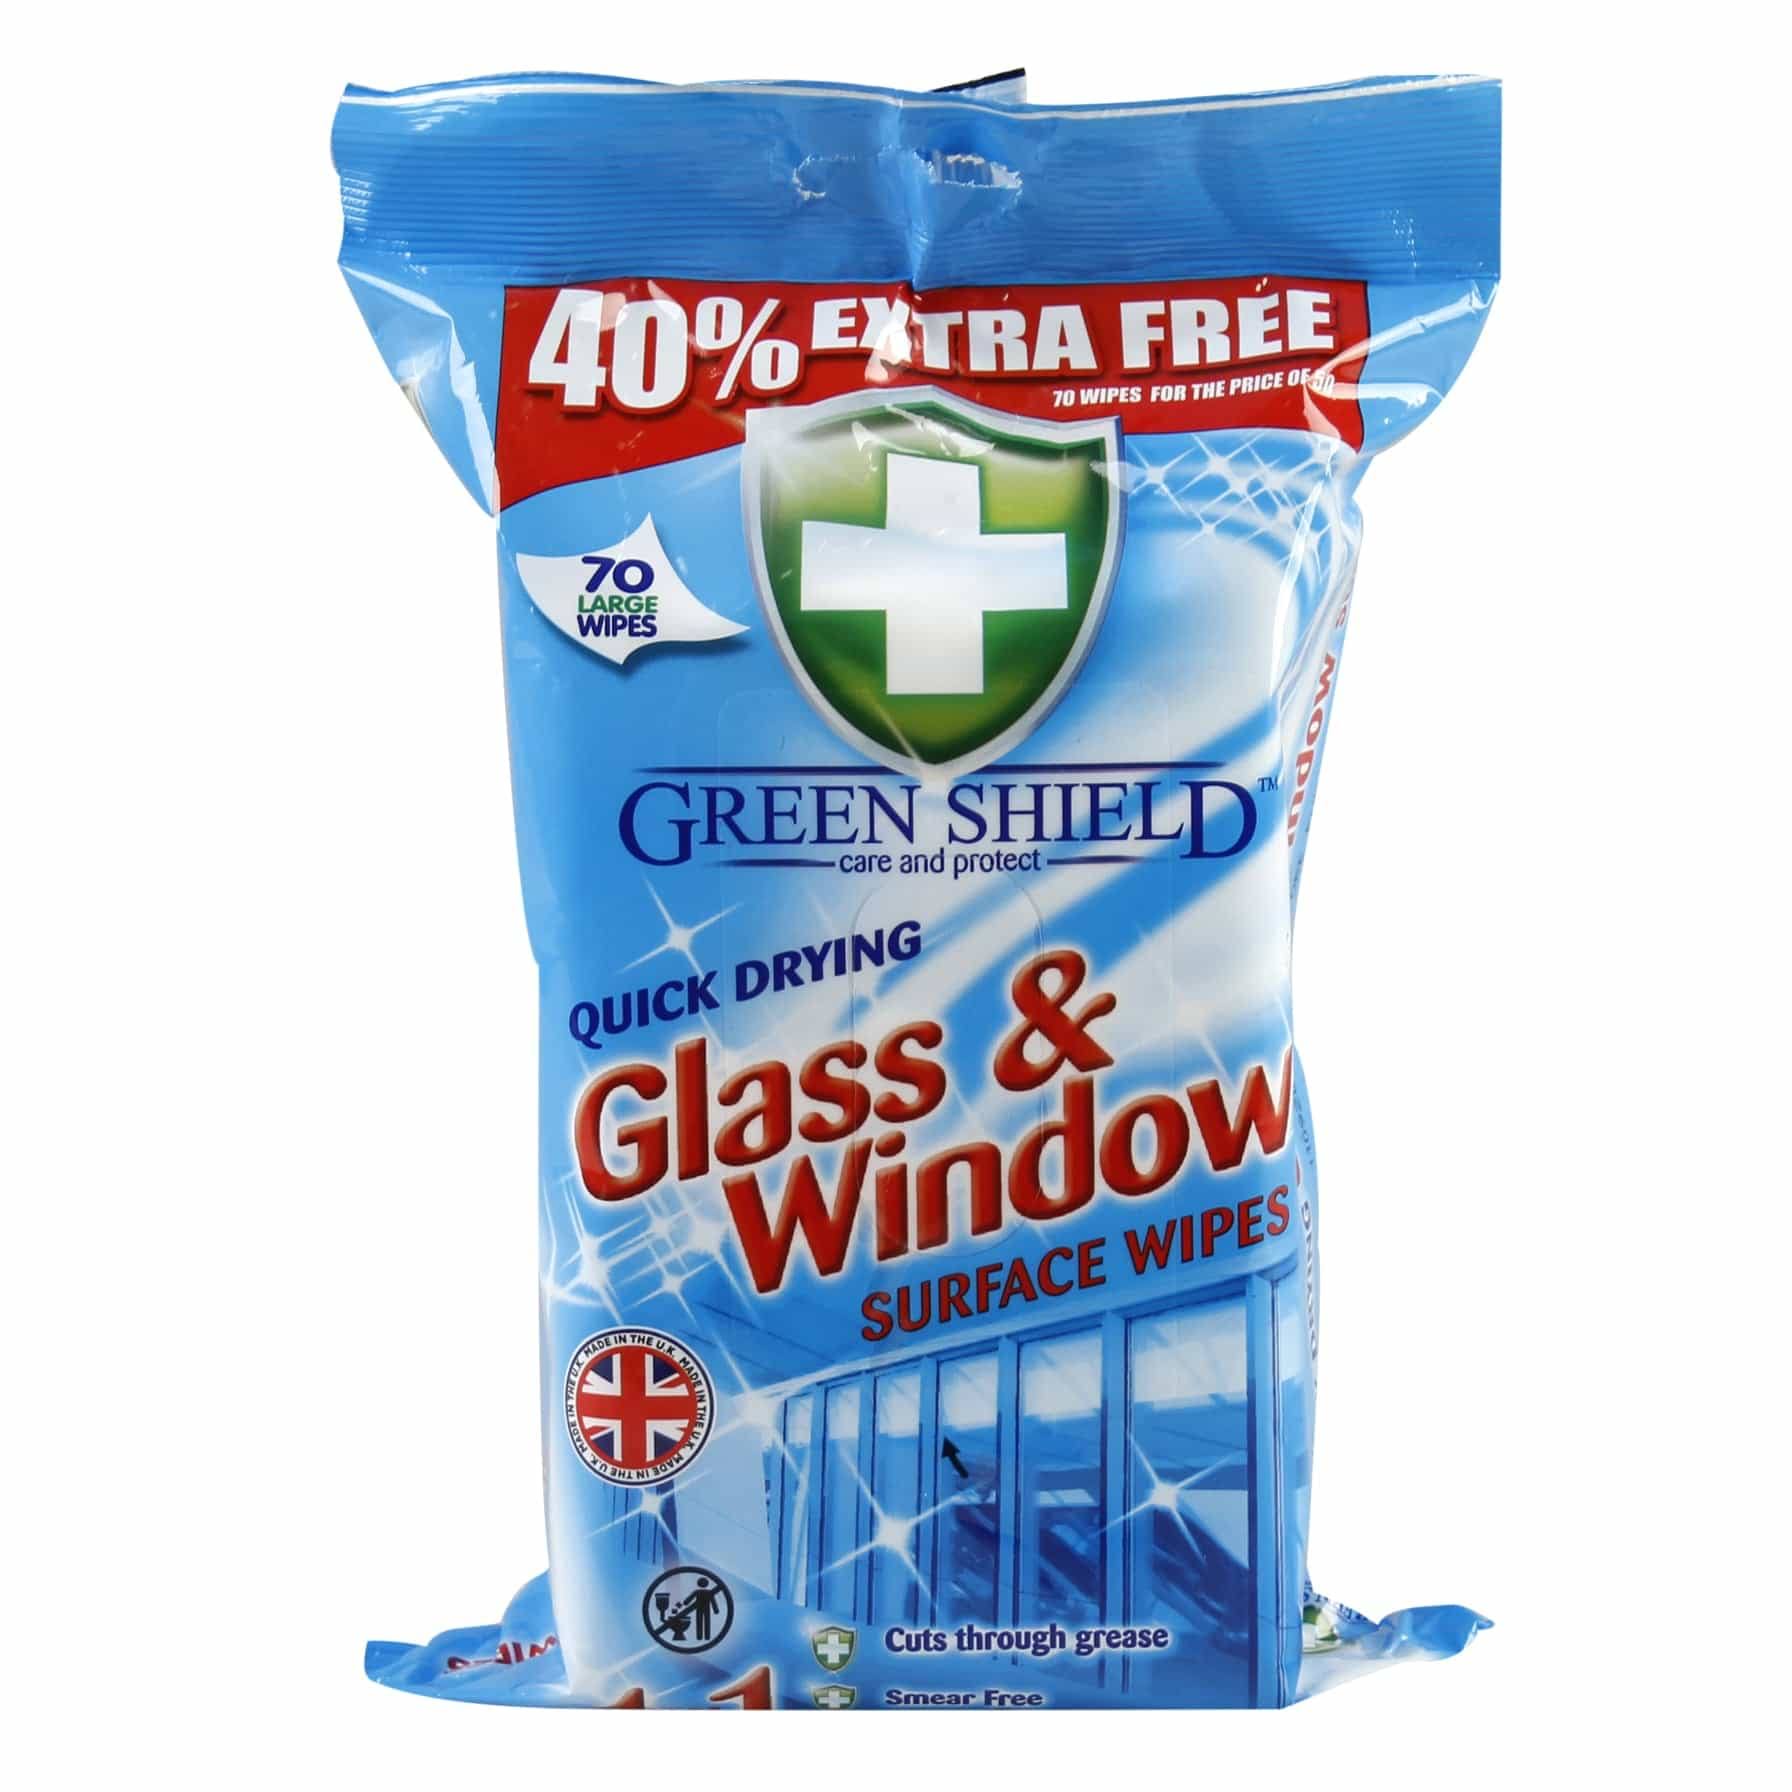 Green Shield Glas- & Window Surface Wipes 70 Pieces